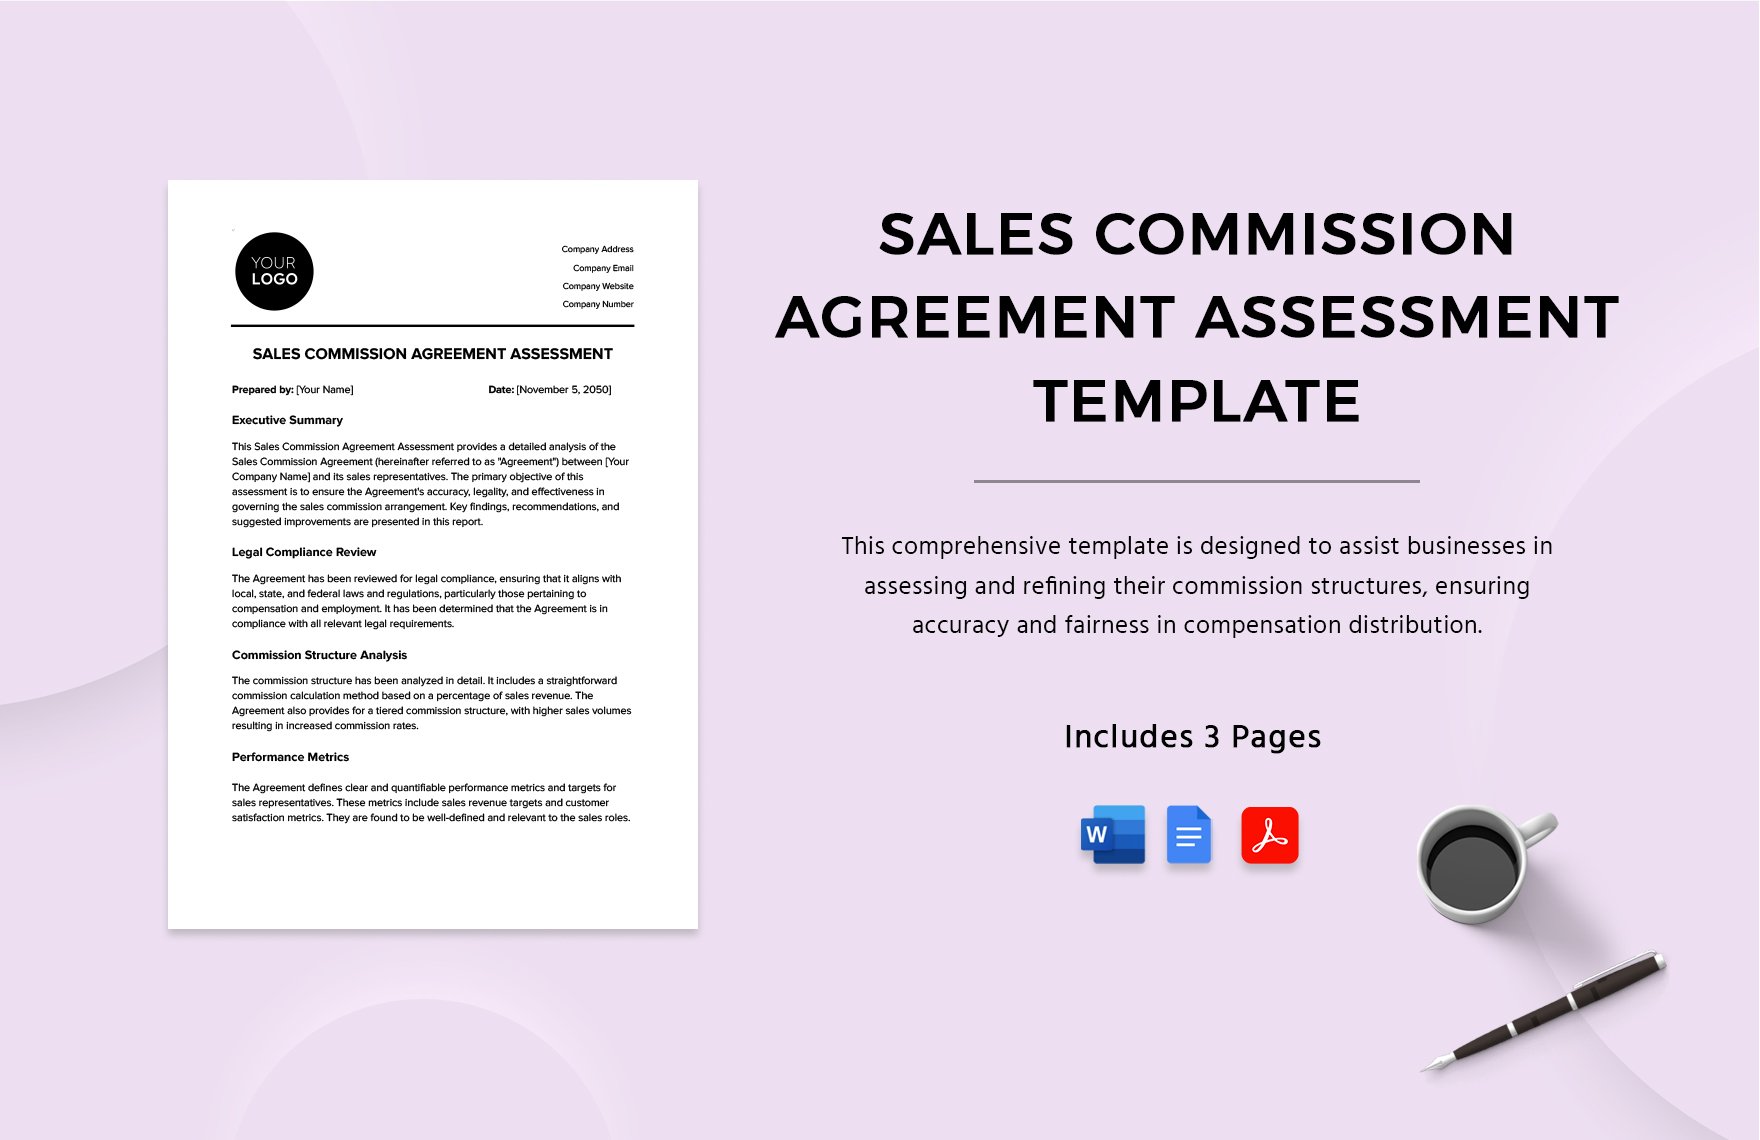 Sales Commission Agreement Assessment Template